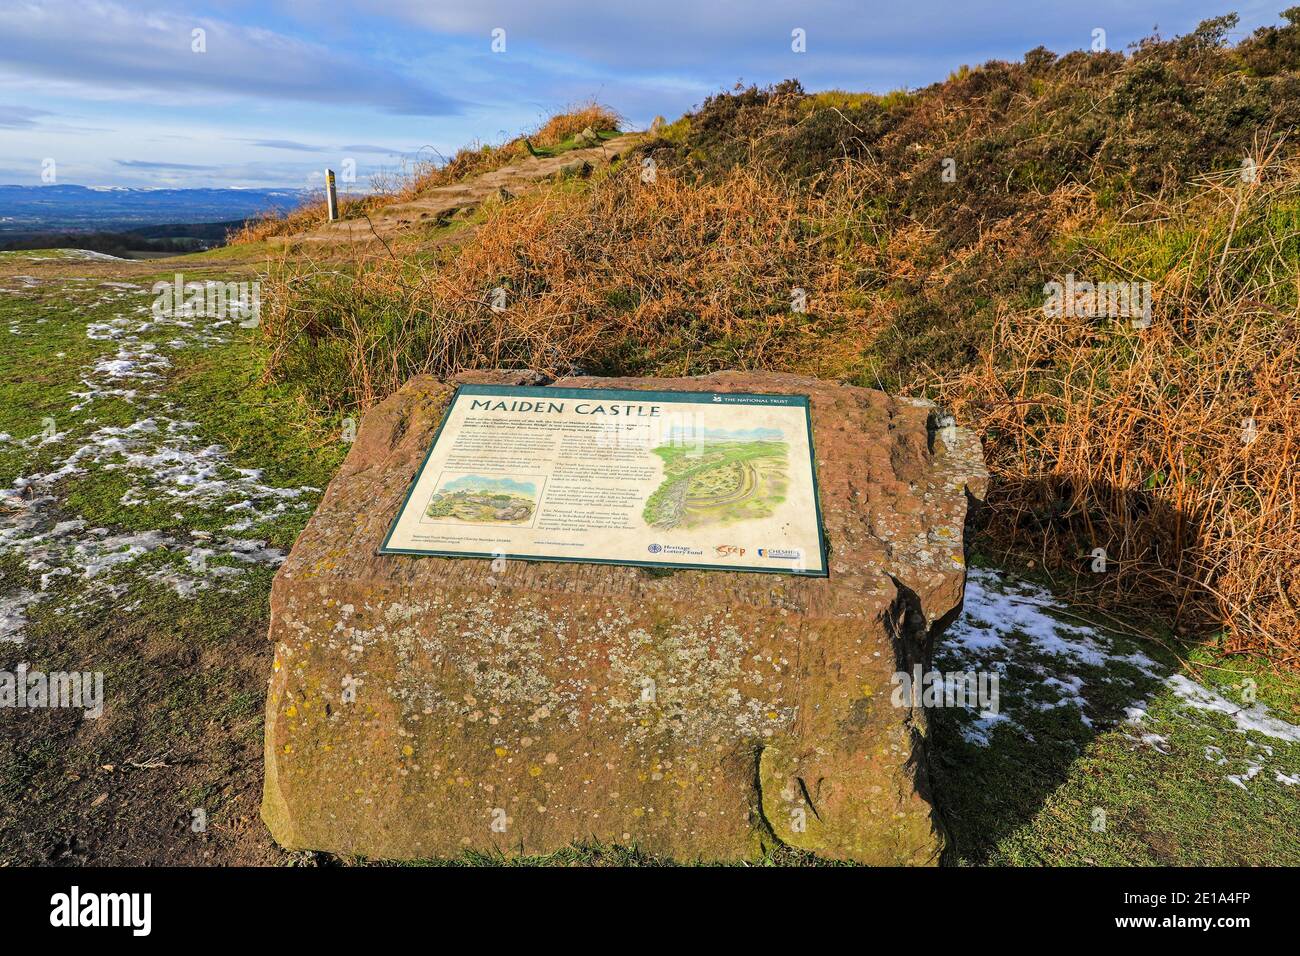 A sign for Maiden Castle, an Iron Age hill fort, Bickerton Hill, Cheshire, England, UK Stock Photo